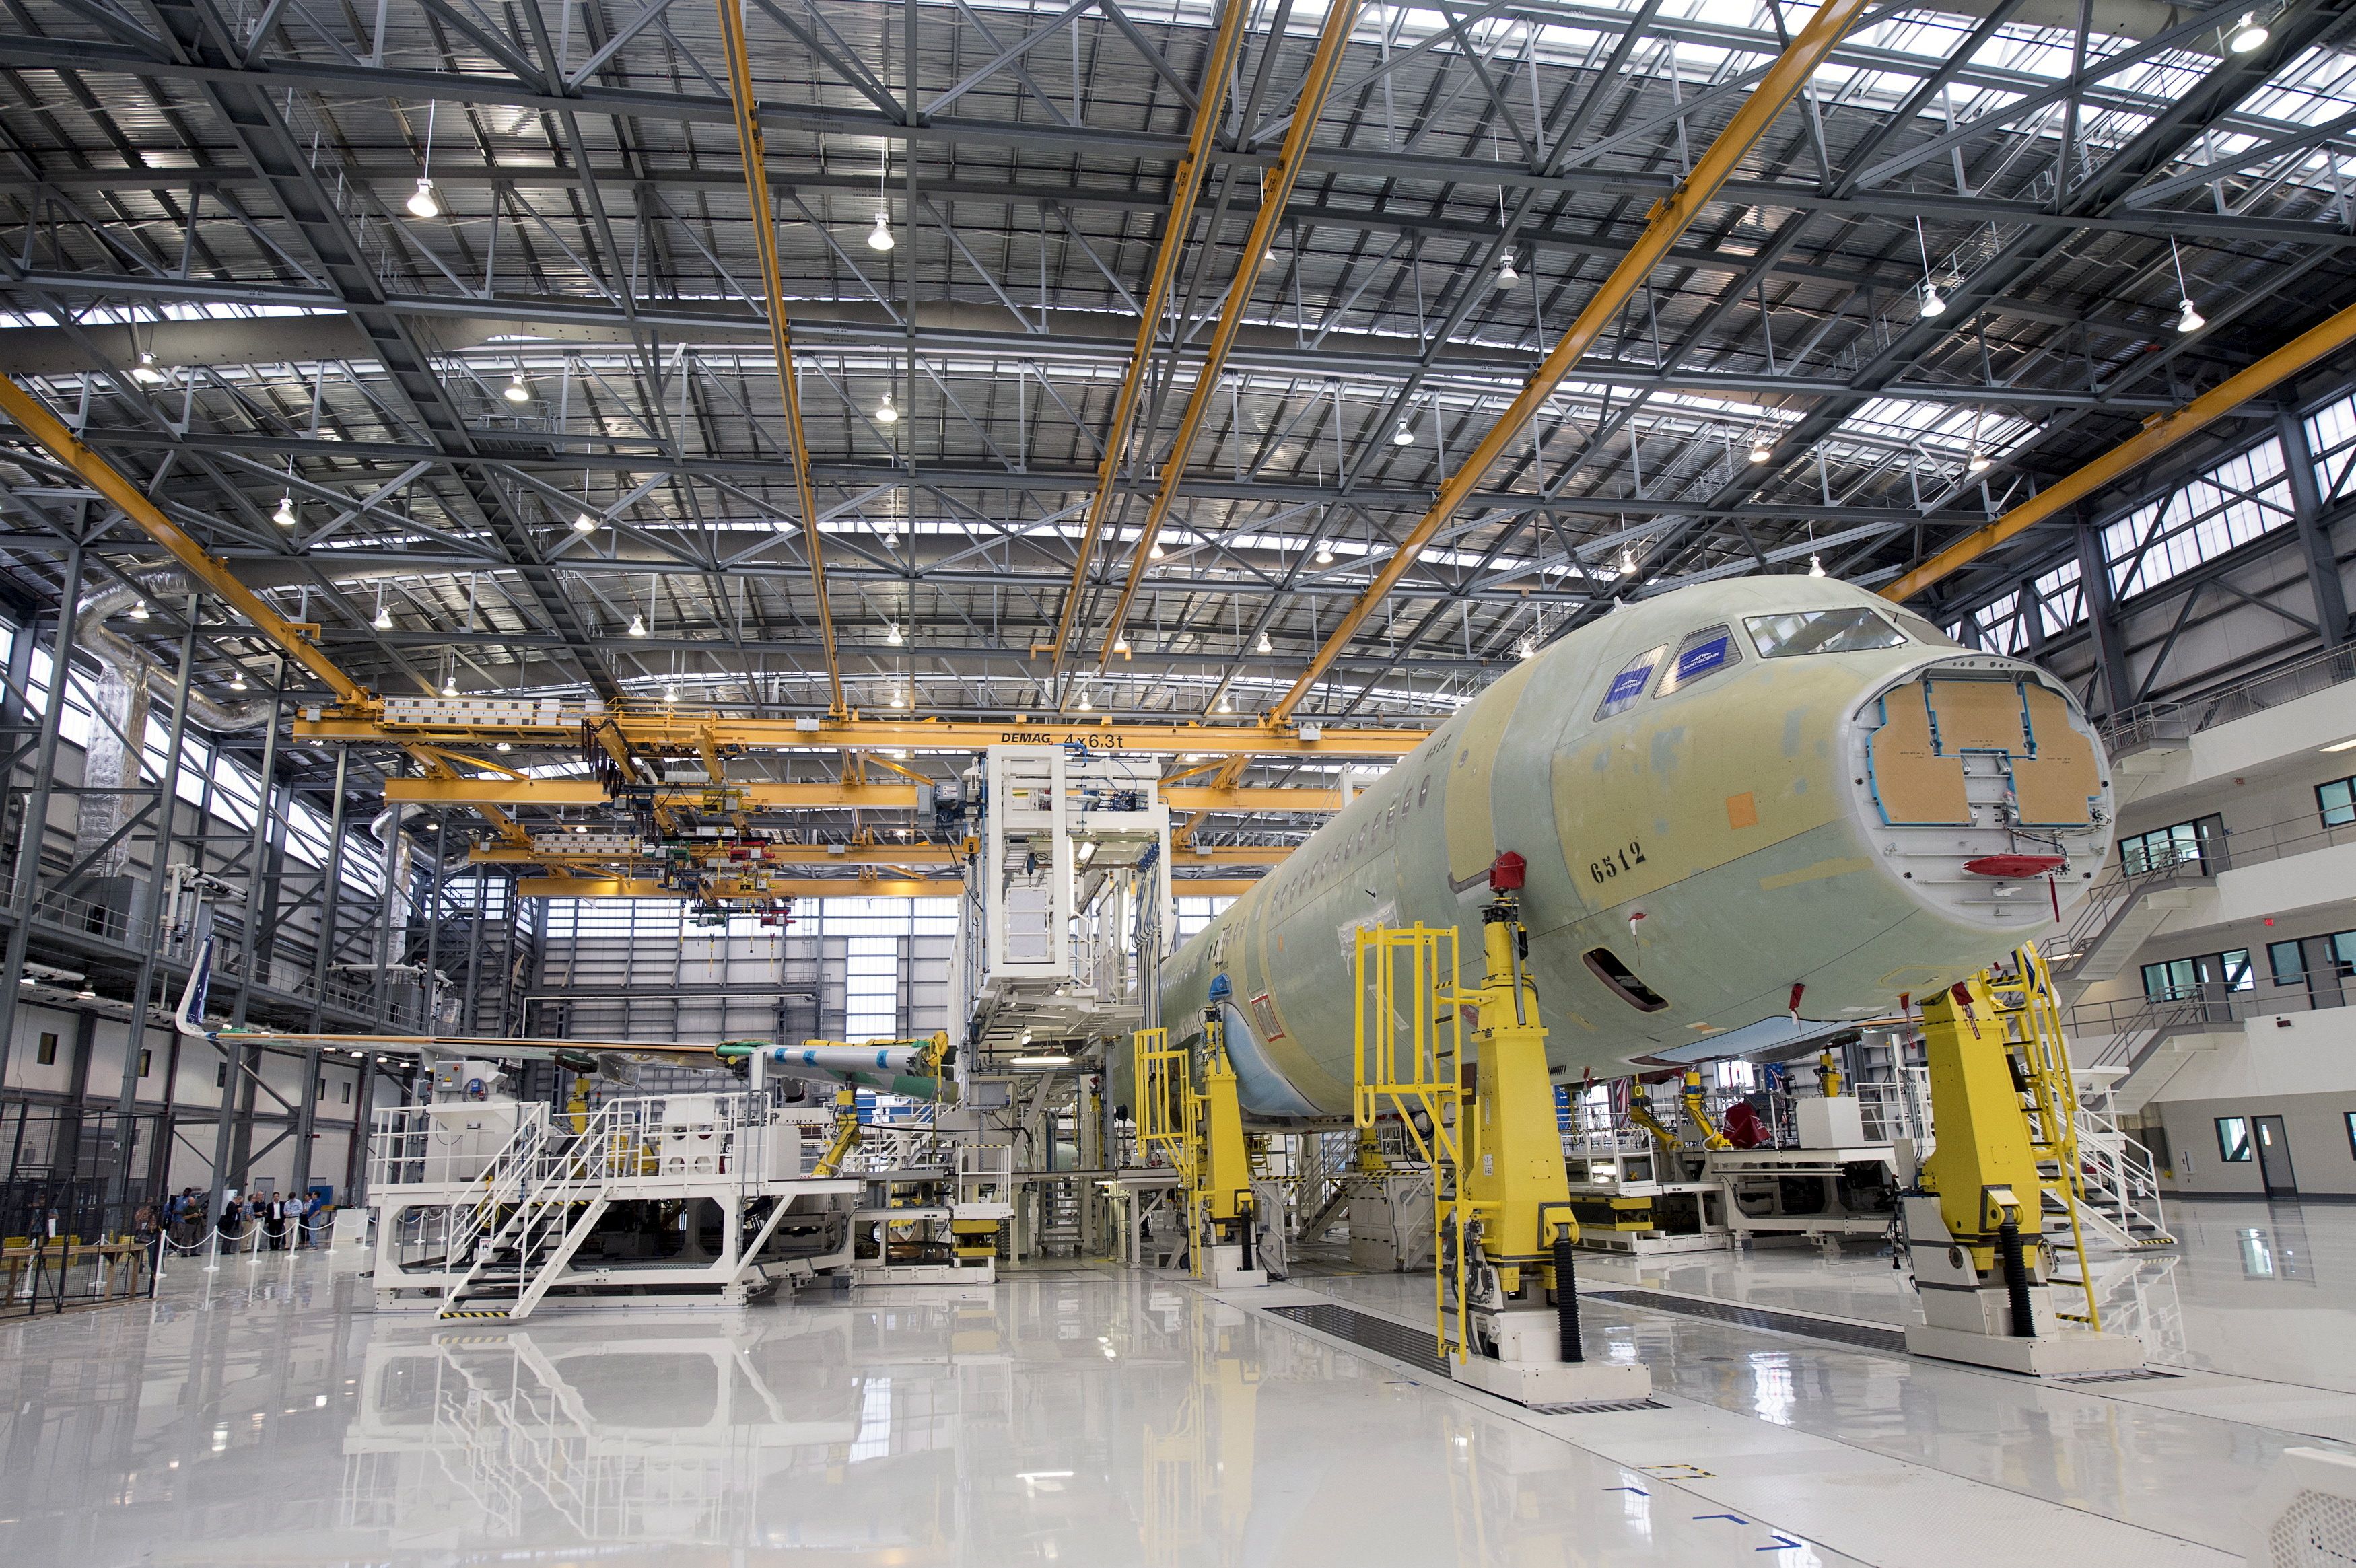 An Airbus A321 is being assembled in the final assembly line hangar at the Airbus U.S. Manufacturing Facility in Mobile